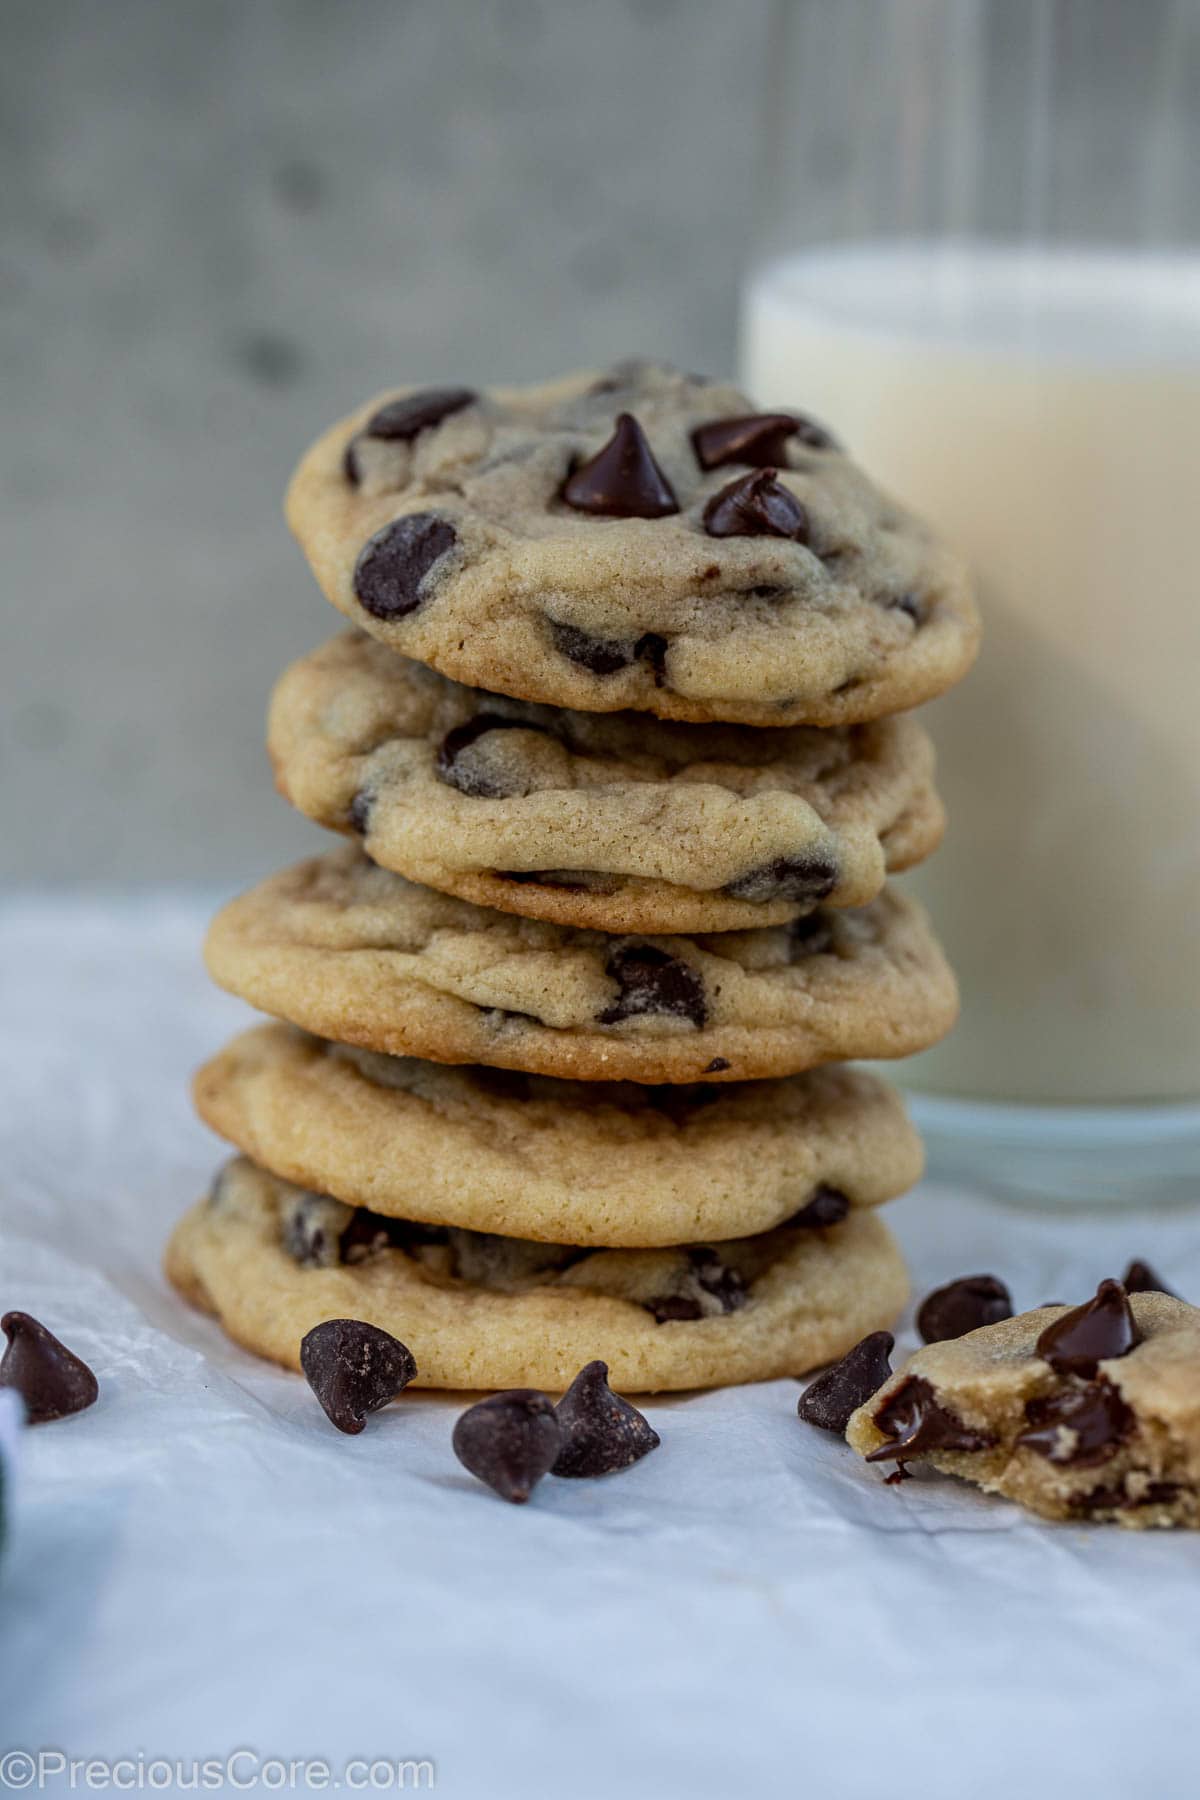 Tall stack of cookies with a glass of milk behind.